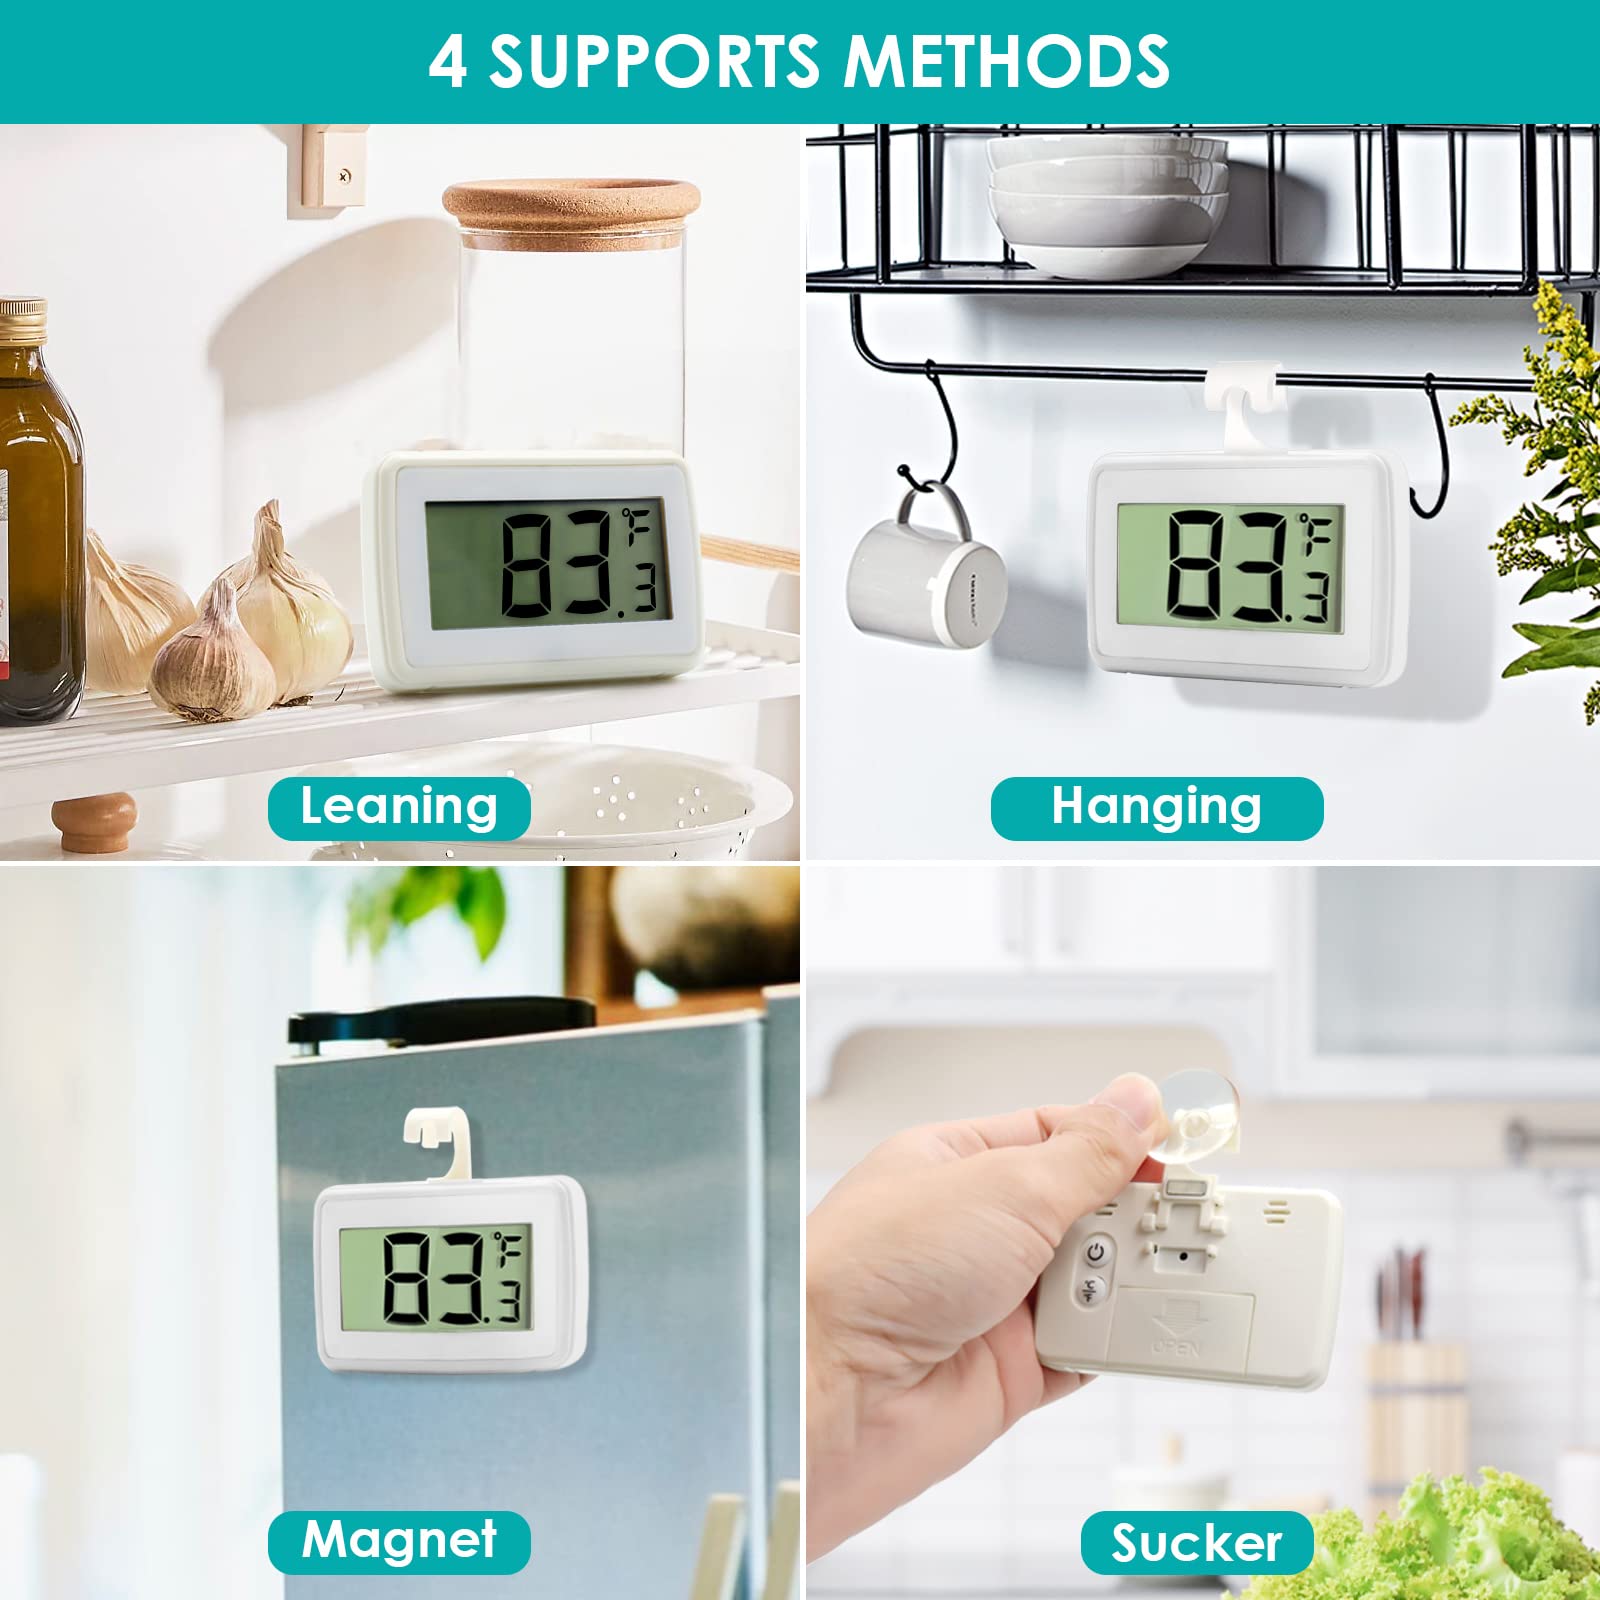 6 Pack Digital Refrigerator Thermometer, Waterproof Freezer Room Thermometer,High Precision Fridge Alarm Thermometer with Hook for Kitchen Home,°C/°F Convertible